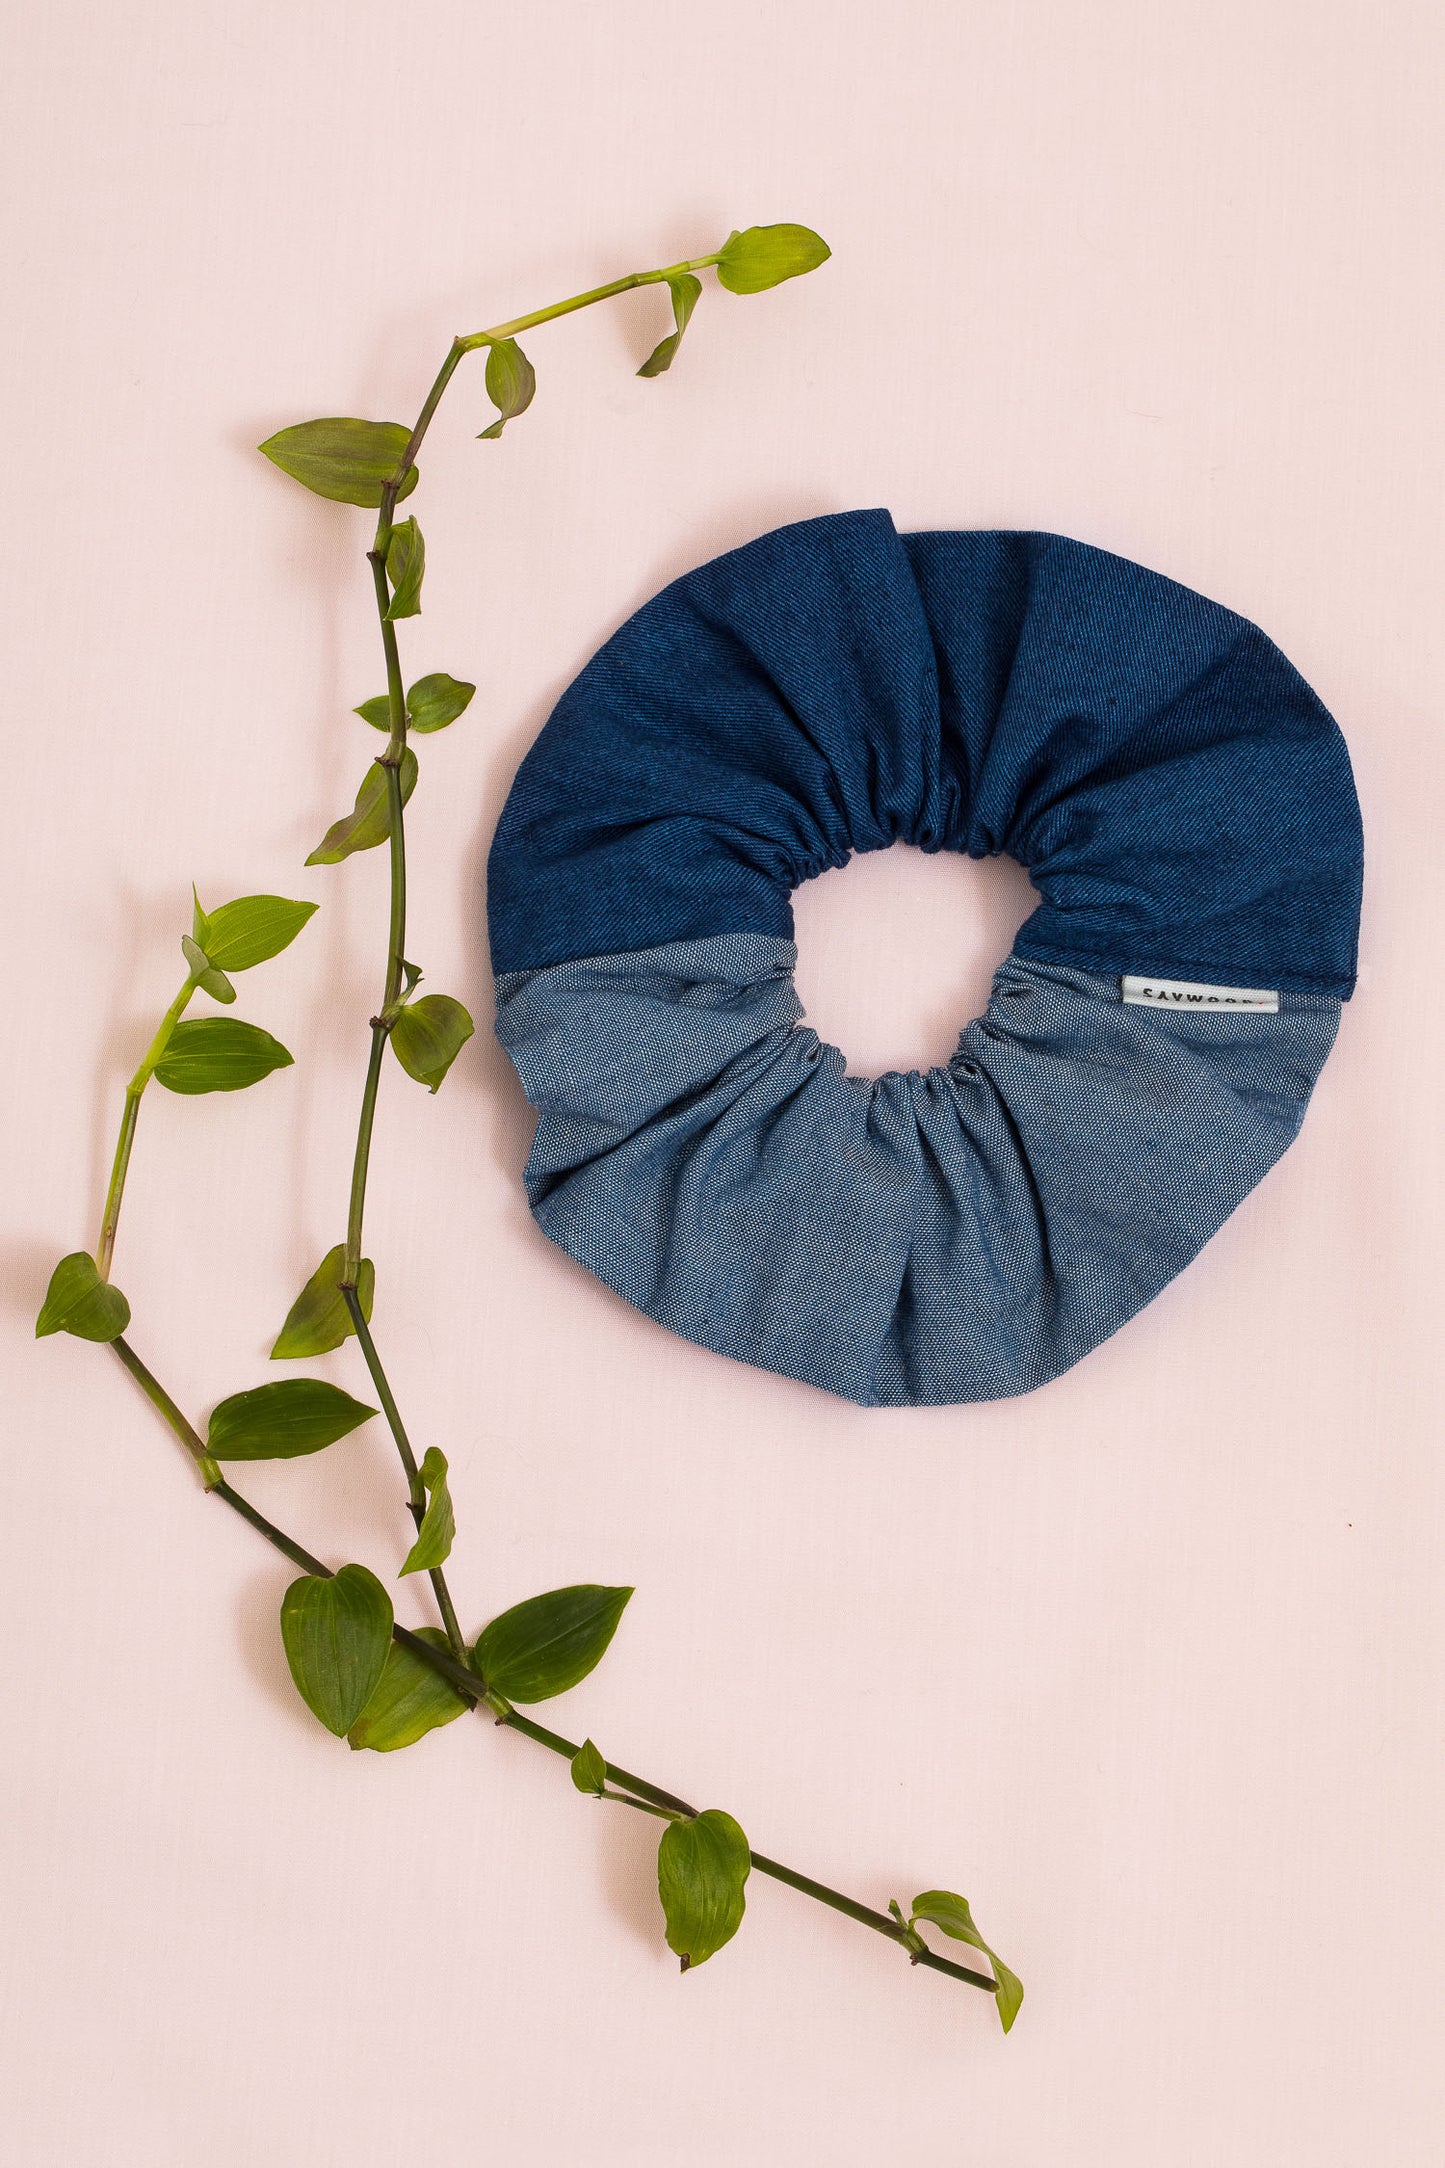 Patchwork scrunchie, made in mid wash and light wash Japanese denim. A Saywood label is stitched into the seam. The scrunchie sits on a pale pink backdrop with green foliage.